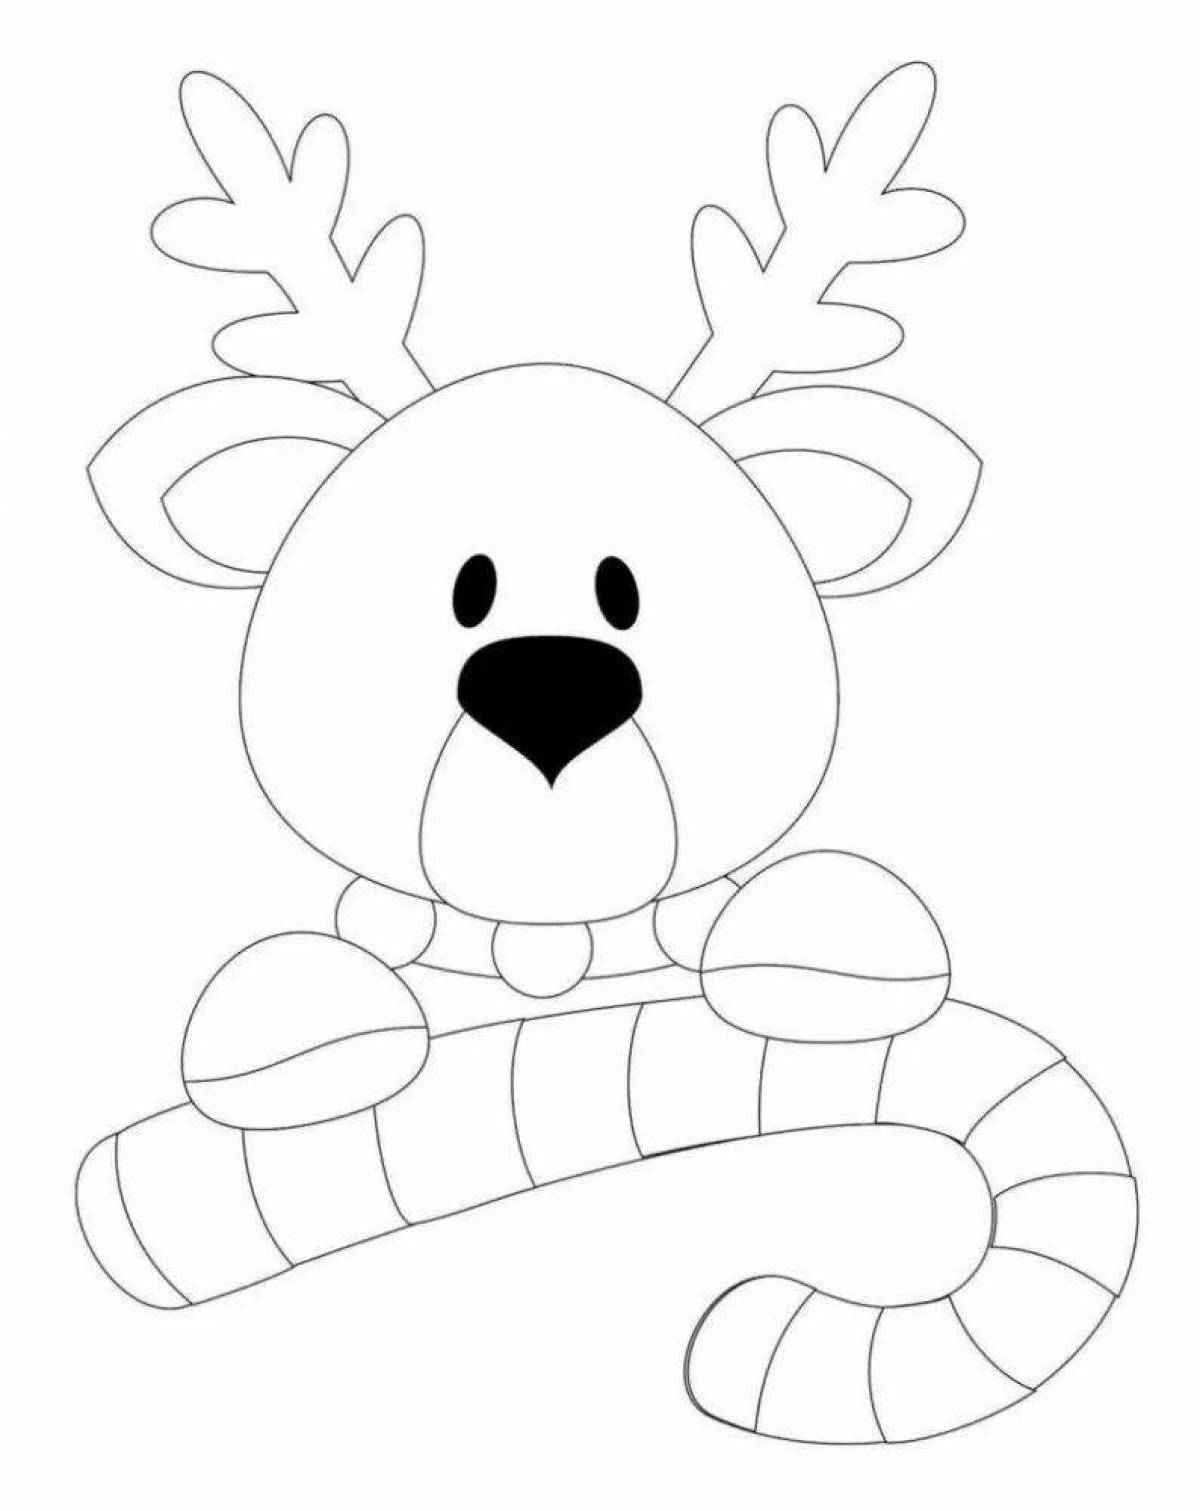 Adorable Christmas crafts coloring book